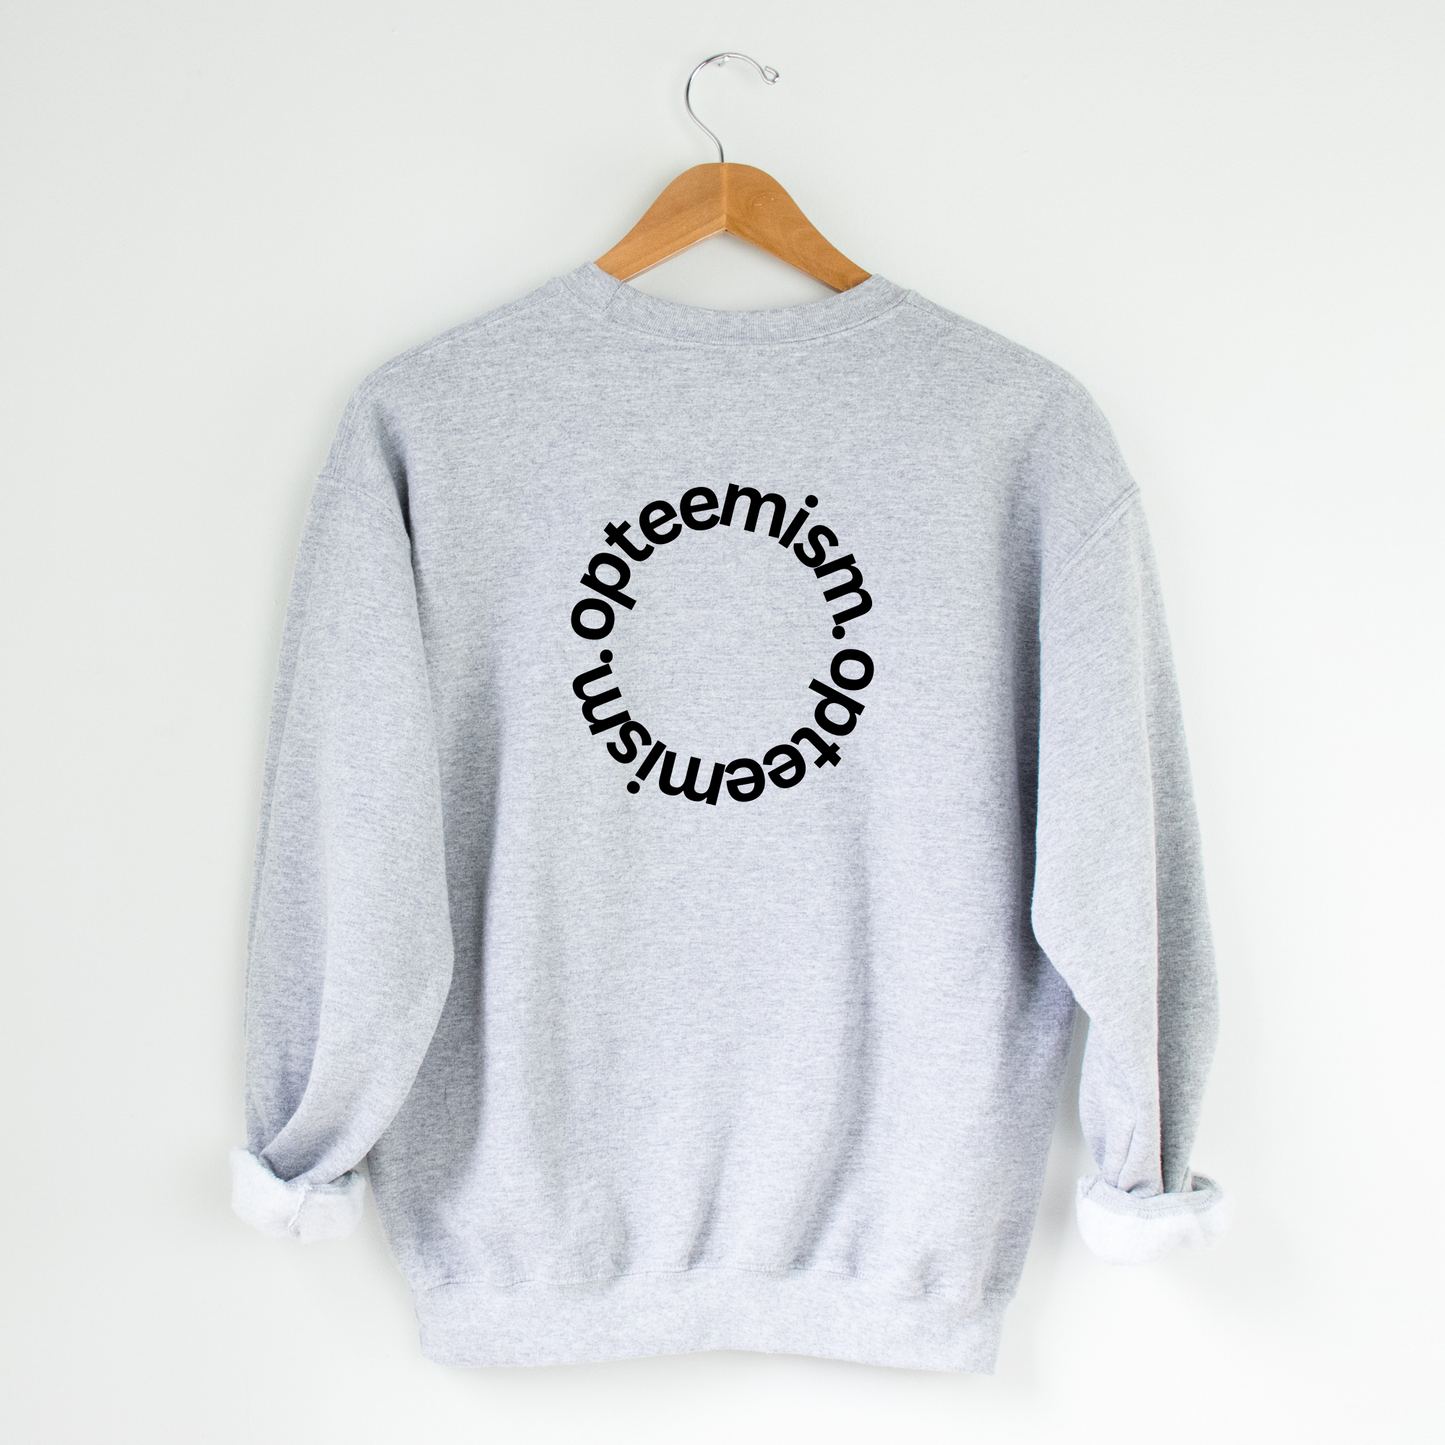 Never Not Tired Graphic Crew Neck Sweater